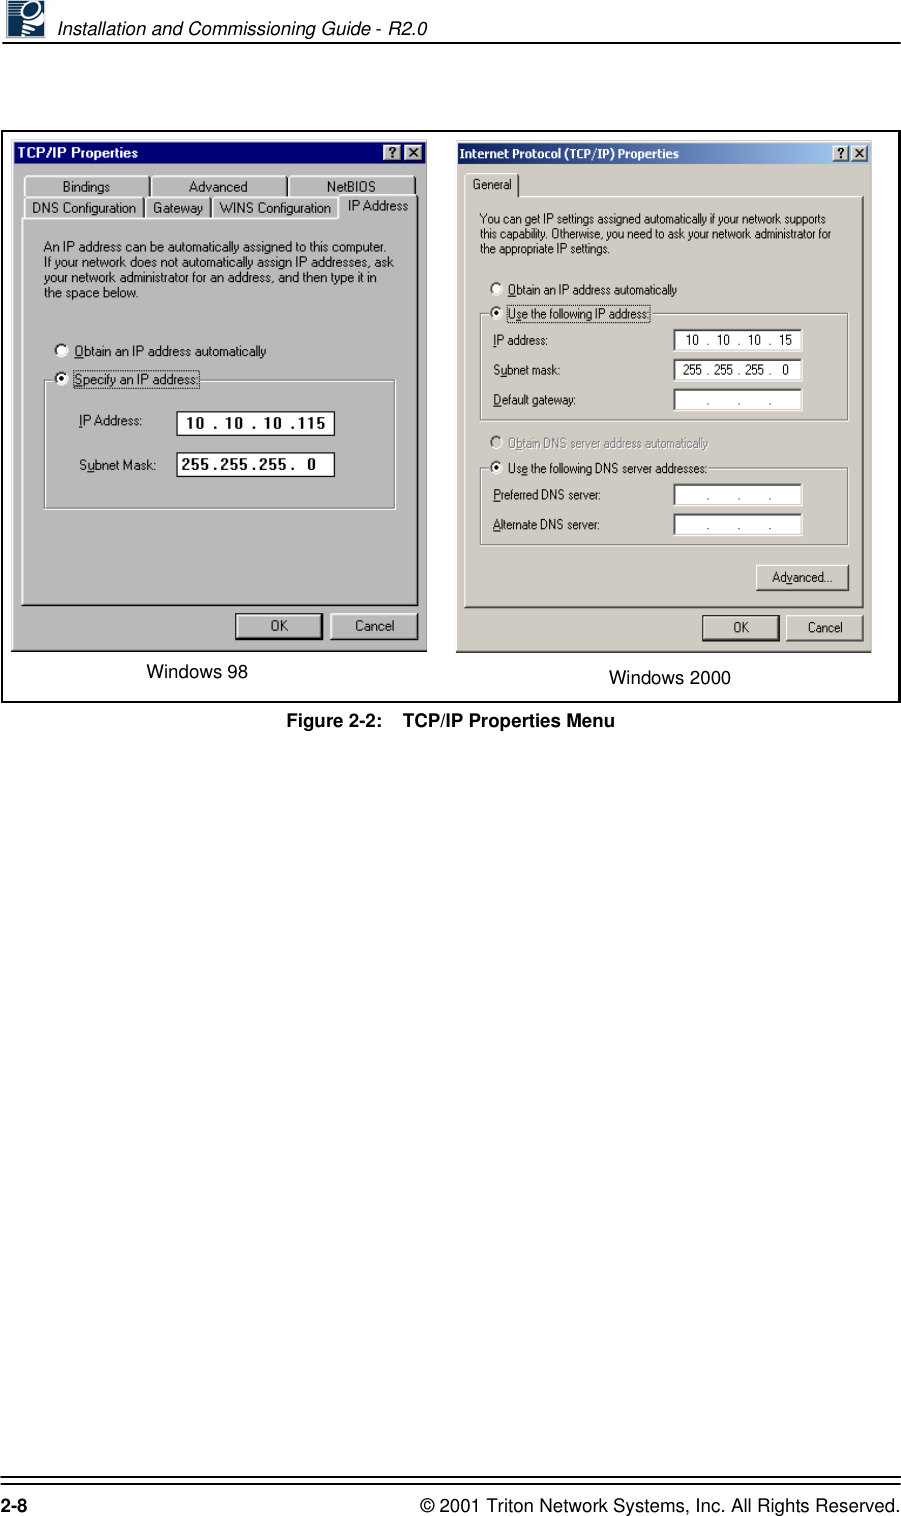  Installation and Commissioning Guide - R2.02-8 © 2001 Triton Network Systems, Inc. All Rights Reserved.Figure 2-2:    TCP/IP Properties MenuWindows 2000 Windows 98 